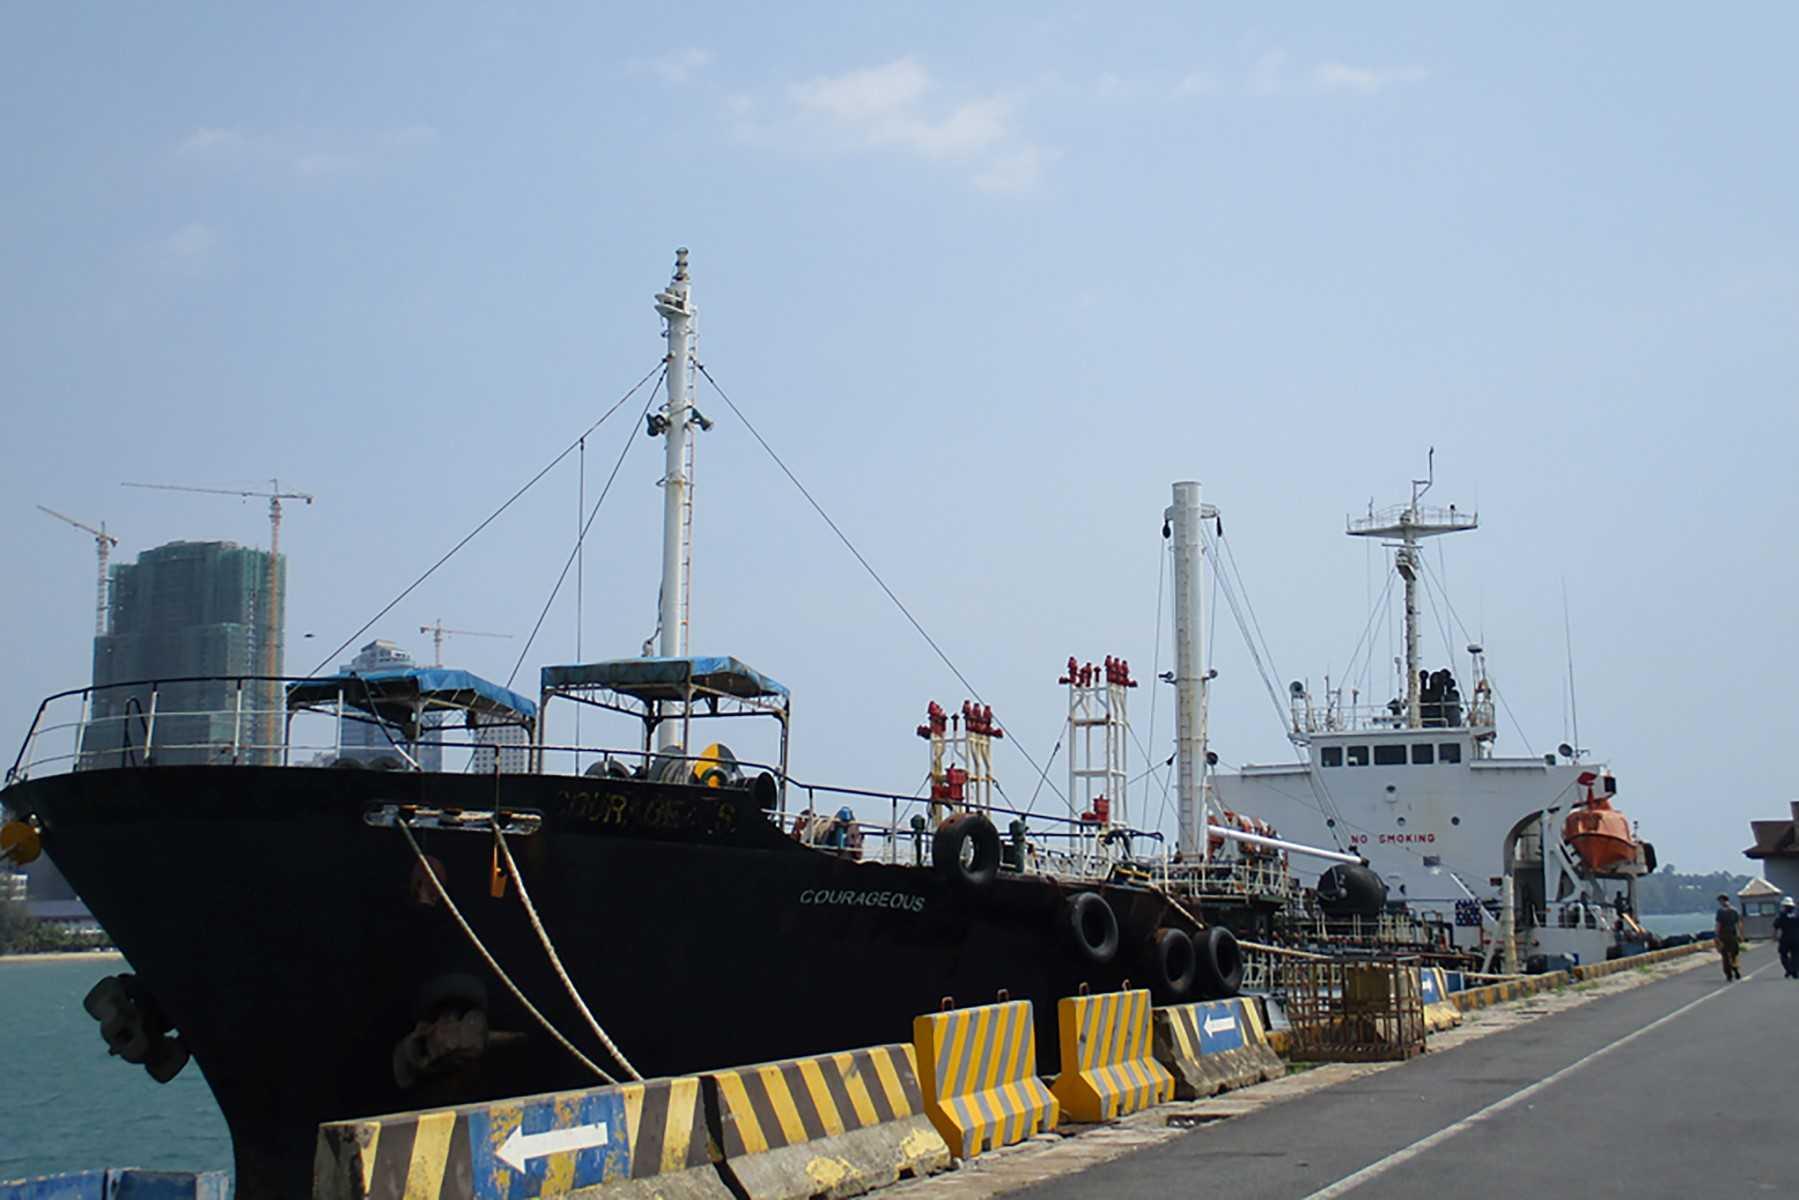 This handout file image obtained on July 30, 2021, courtesy of the US Department of Justice, shows oil tanker M/T Courageous docked at an undisclosed location and date. Photo: AFP